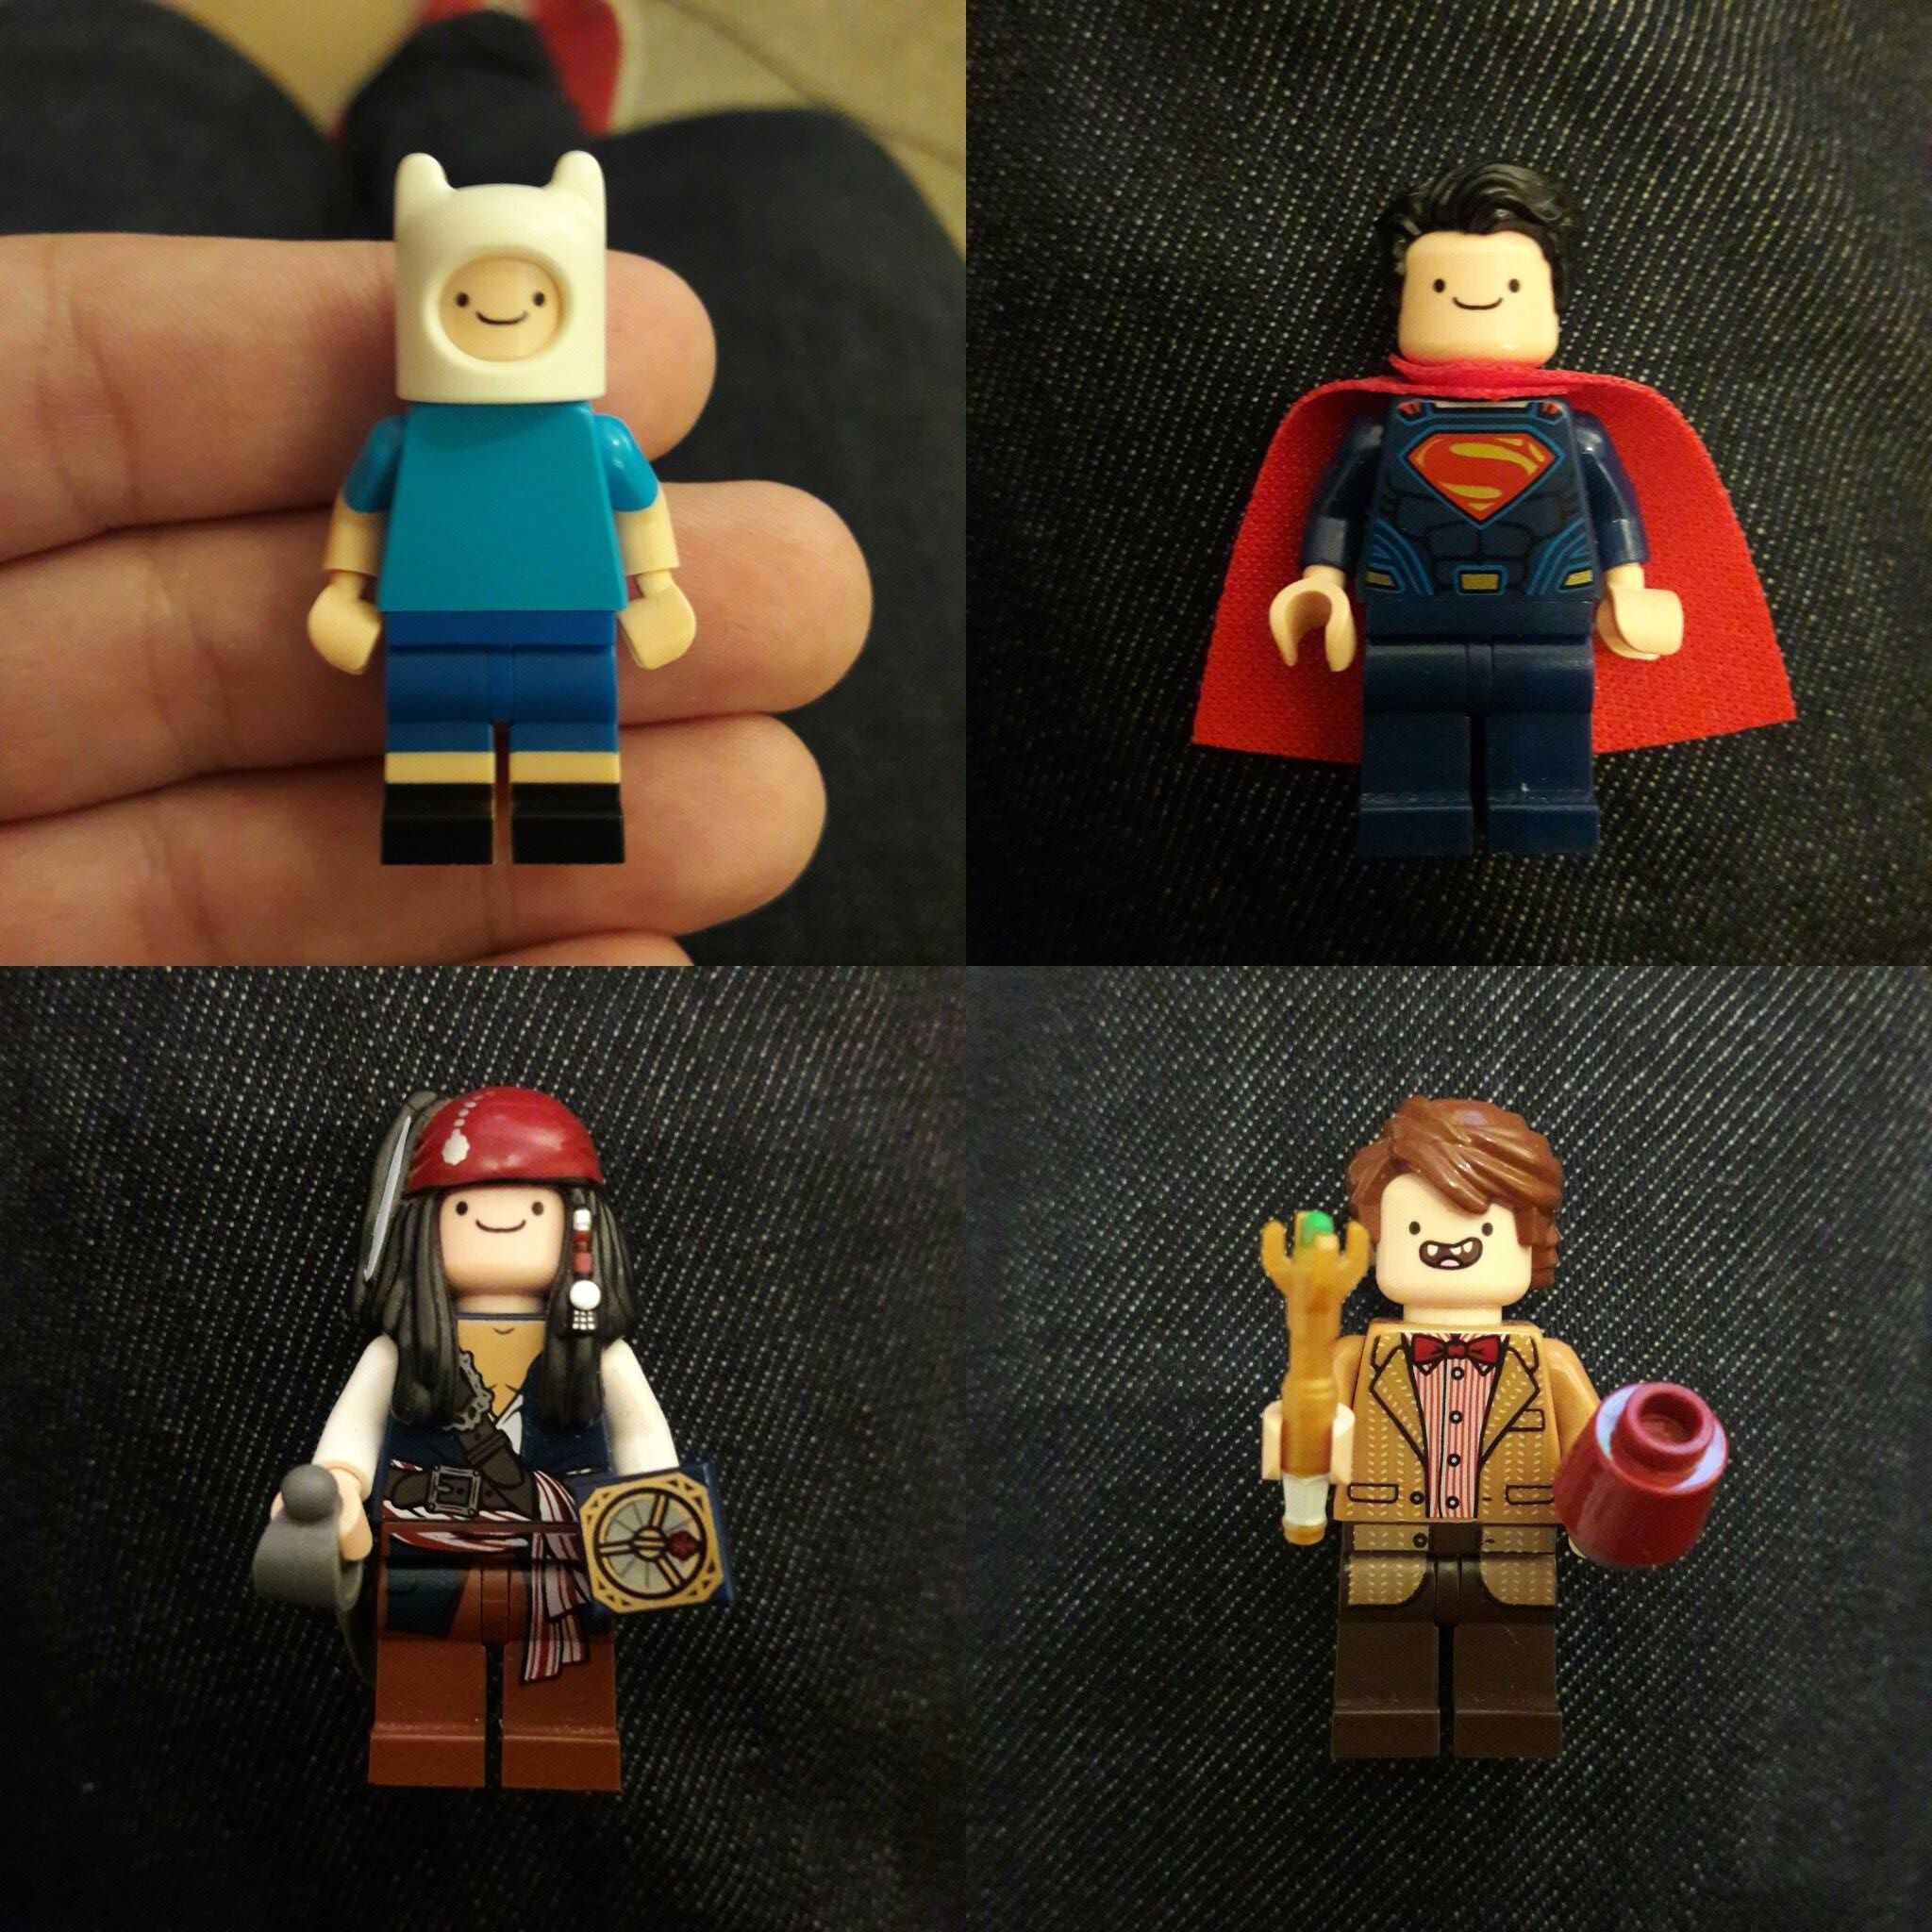 I'm pretty sure Finn's head now is my favorite LEGO piece ever.